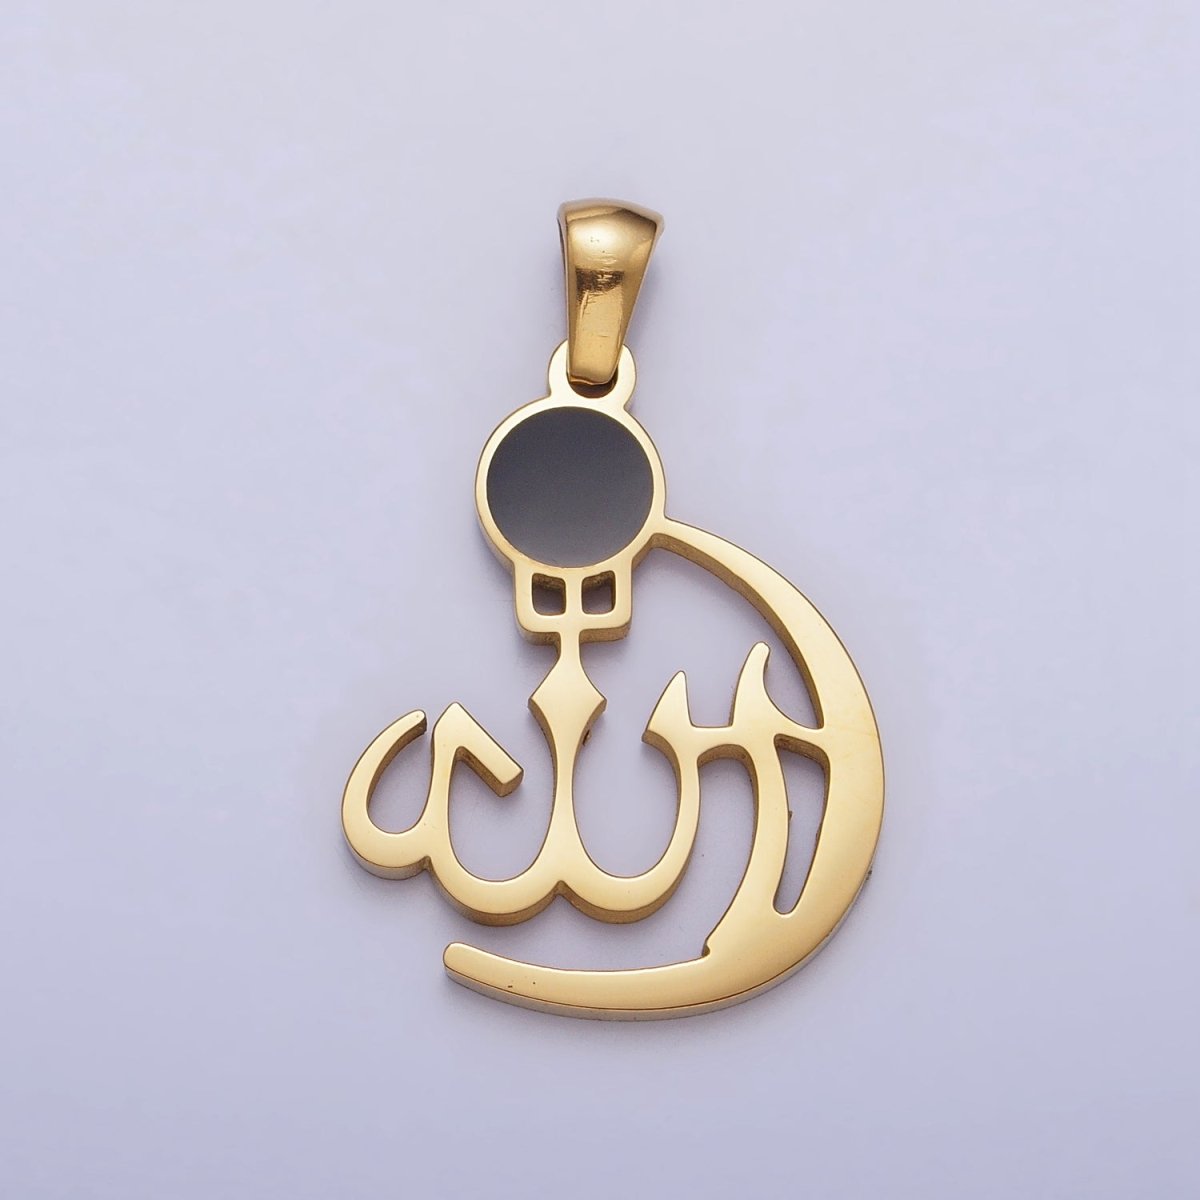 Stainless Steel "Allah" "God" Calligraphy Arabic Muslim Religious Pendant in Gold & Silver J-473 J-486 - DLUXCA